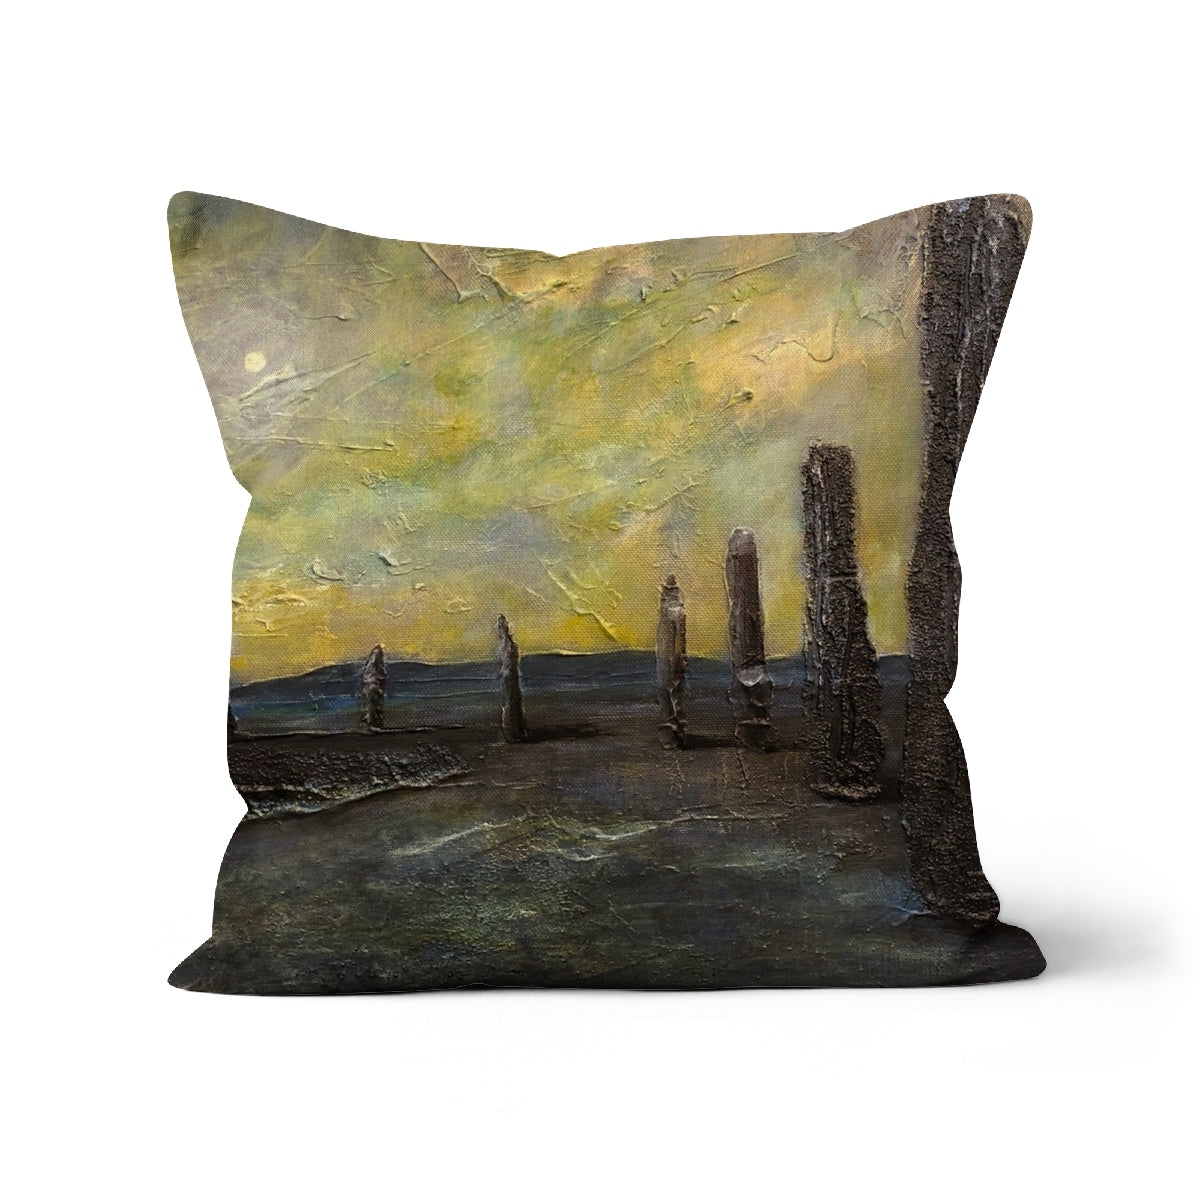 An Ethereal Ring Of Brodgar Art Gifts Cushion-Cushions-Orkney Art Gallery-Faux Suede-18"x18"-Paintings, Prints, Homeware, Art Gifts From Scotland By Scottish Artist Kevin Hunter